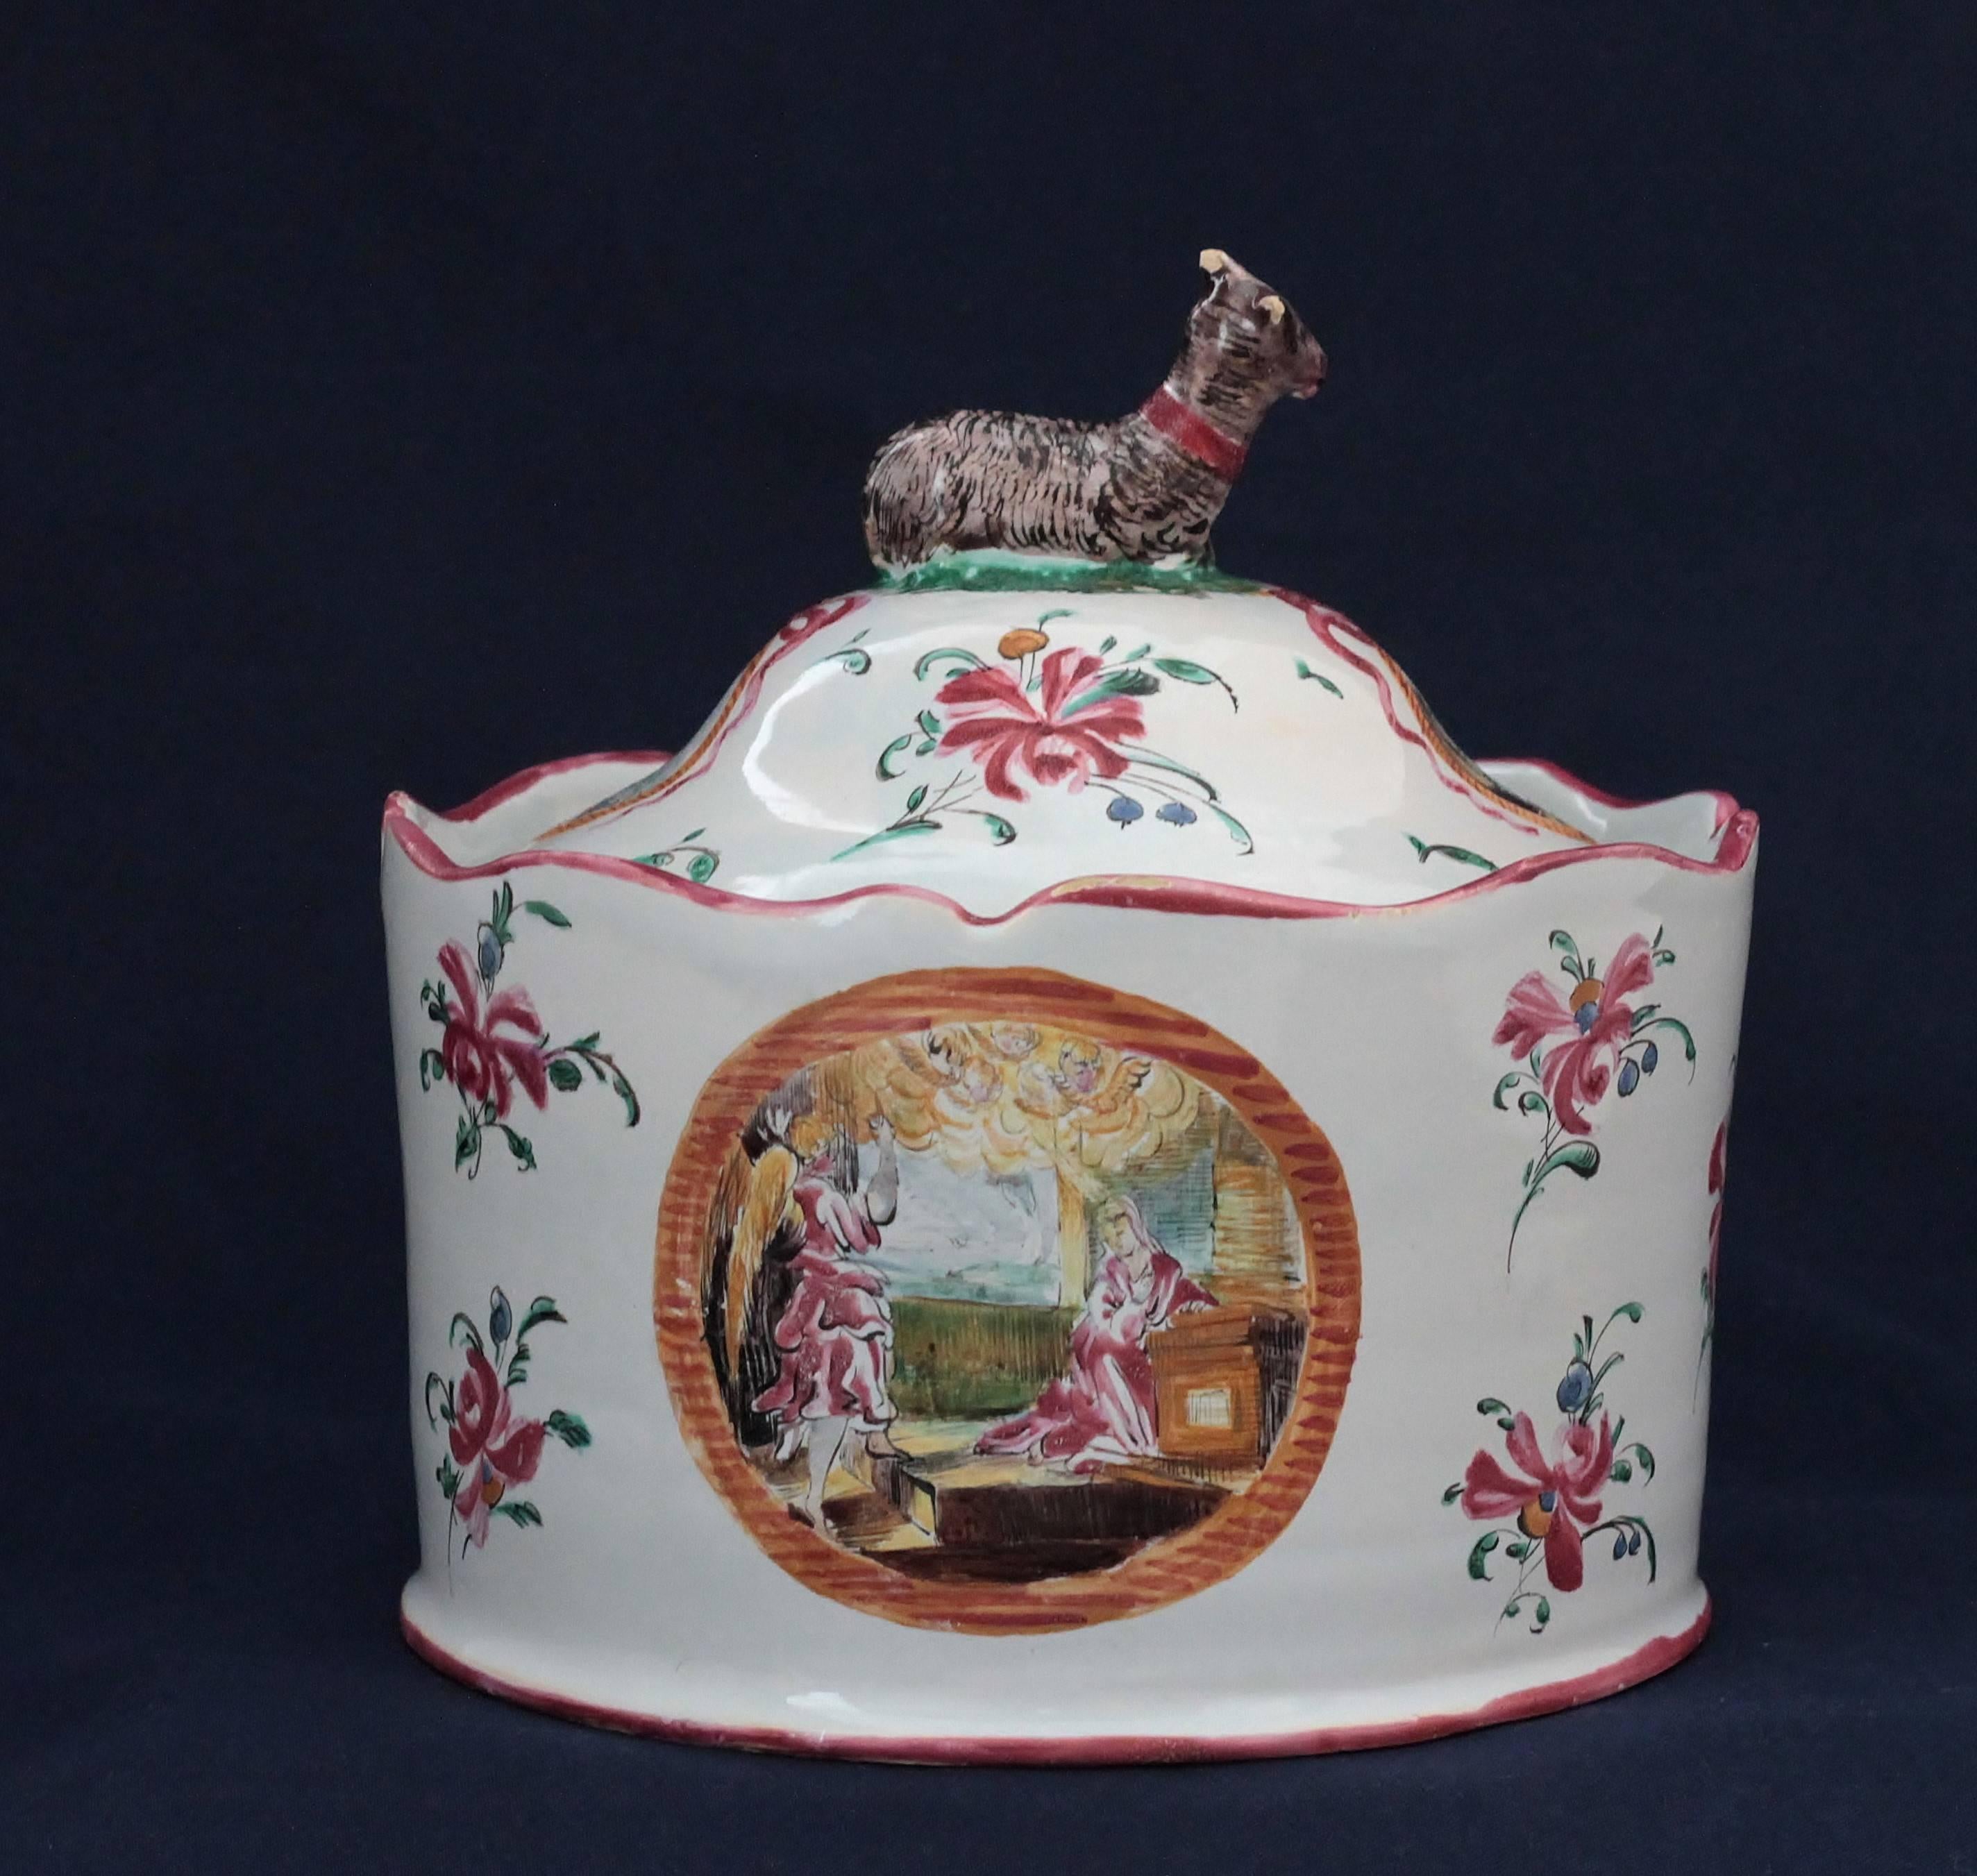 A Moustiers (France) covered round box in faience with a polychrome decoration of religious scene : The Annunciation and Saint Marie-Madeleine, and flowers. Goat on the lid. Factory of Fouques, circa 1780-1790. 18th century. Measures: Diameter 15